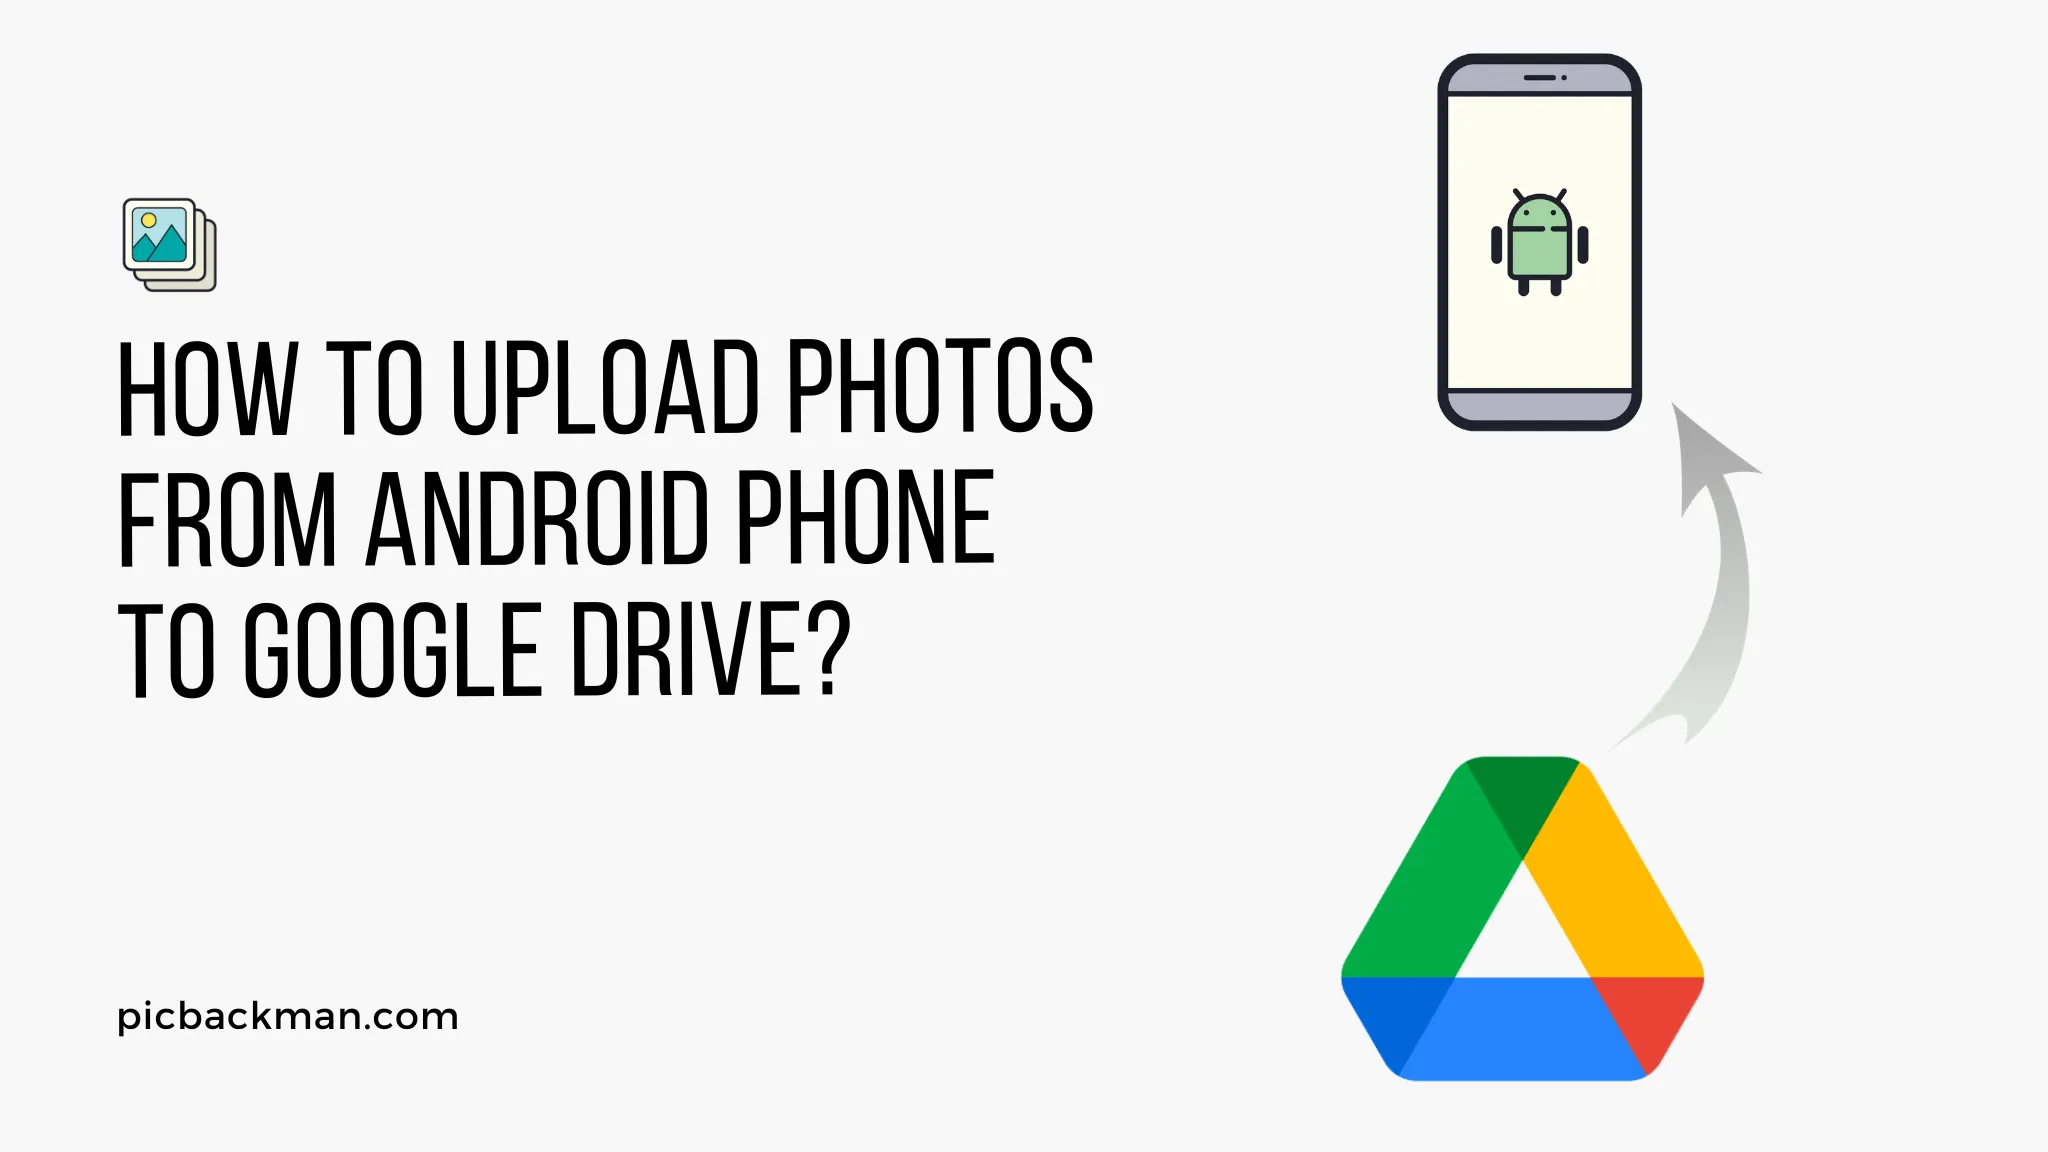 How to upload photos from Android Phone to Google Drive?